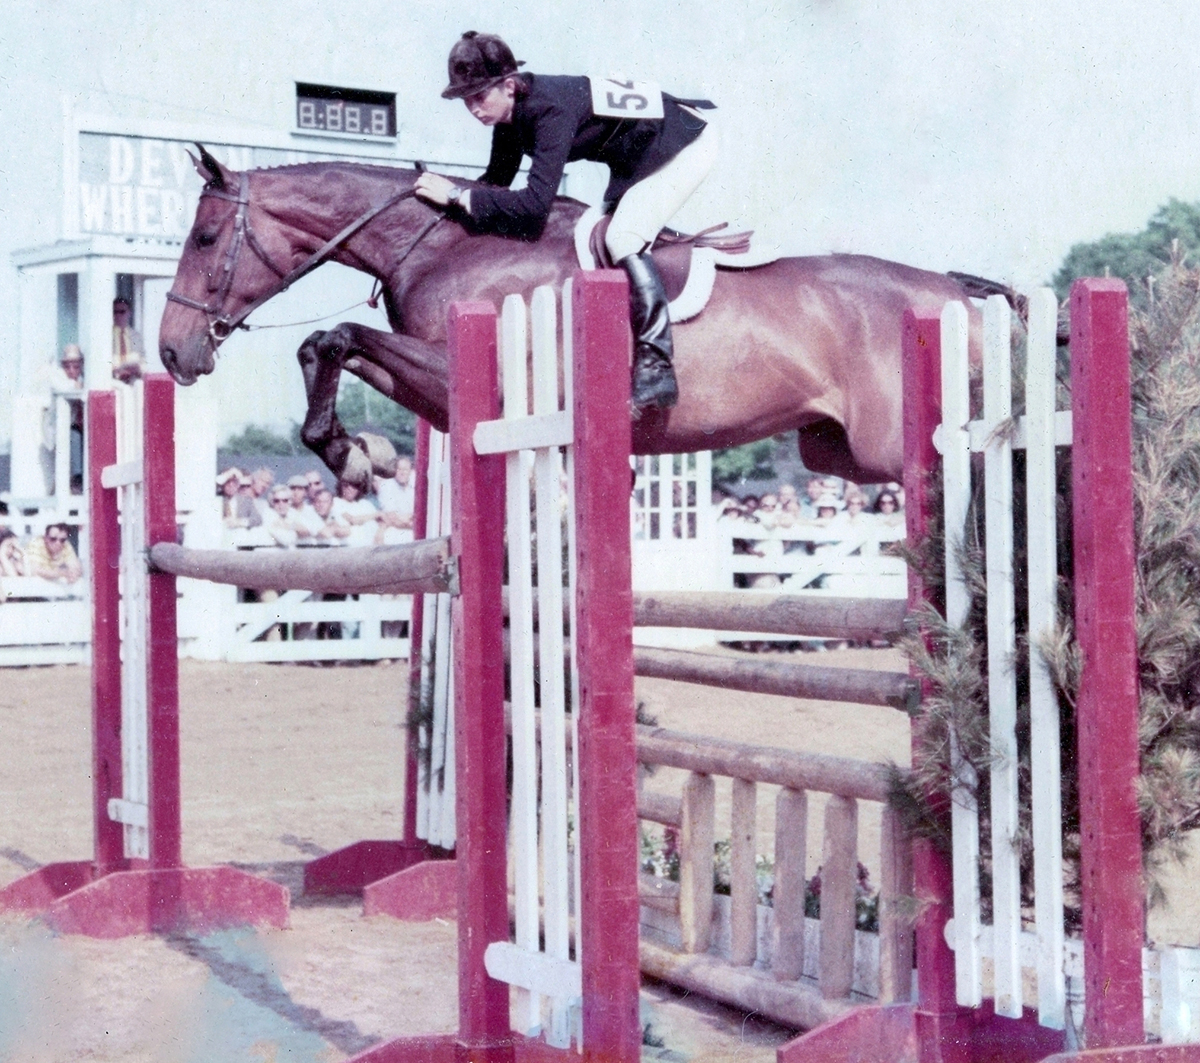 Sign The Card with Jane Womble (now Gaston up) - Regular Working Hunter Champion at Devon in 1972. Photo by Freudy.